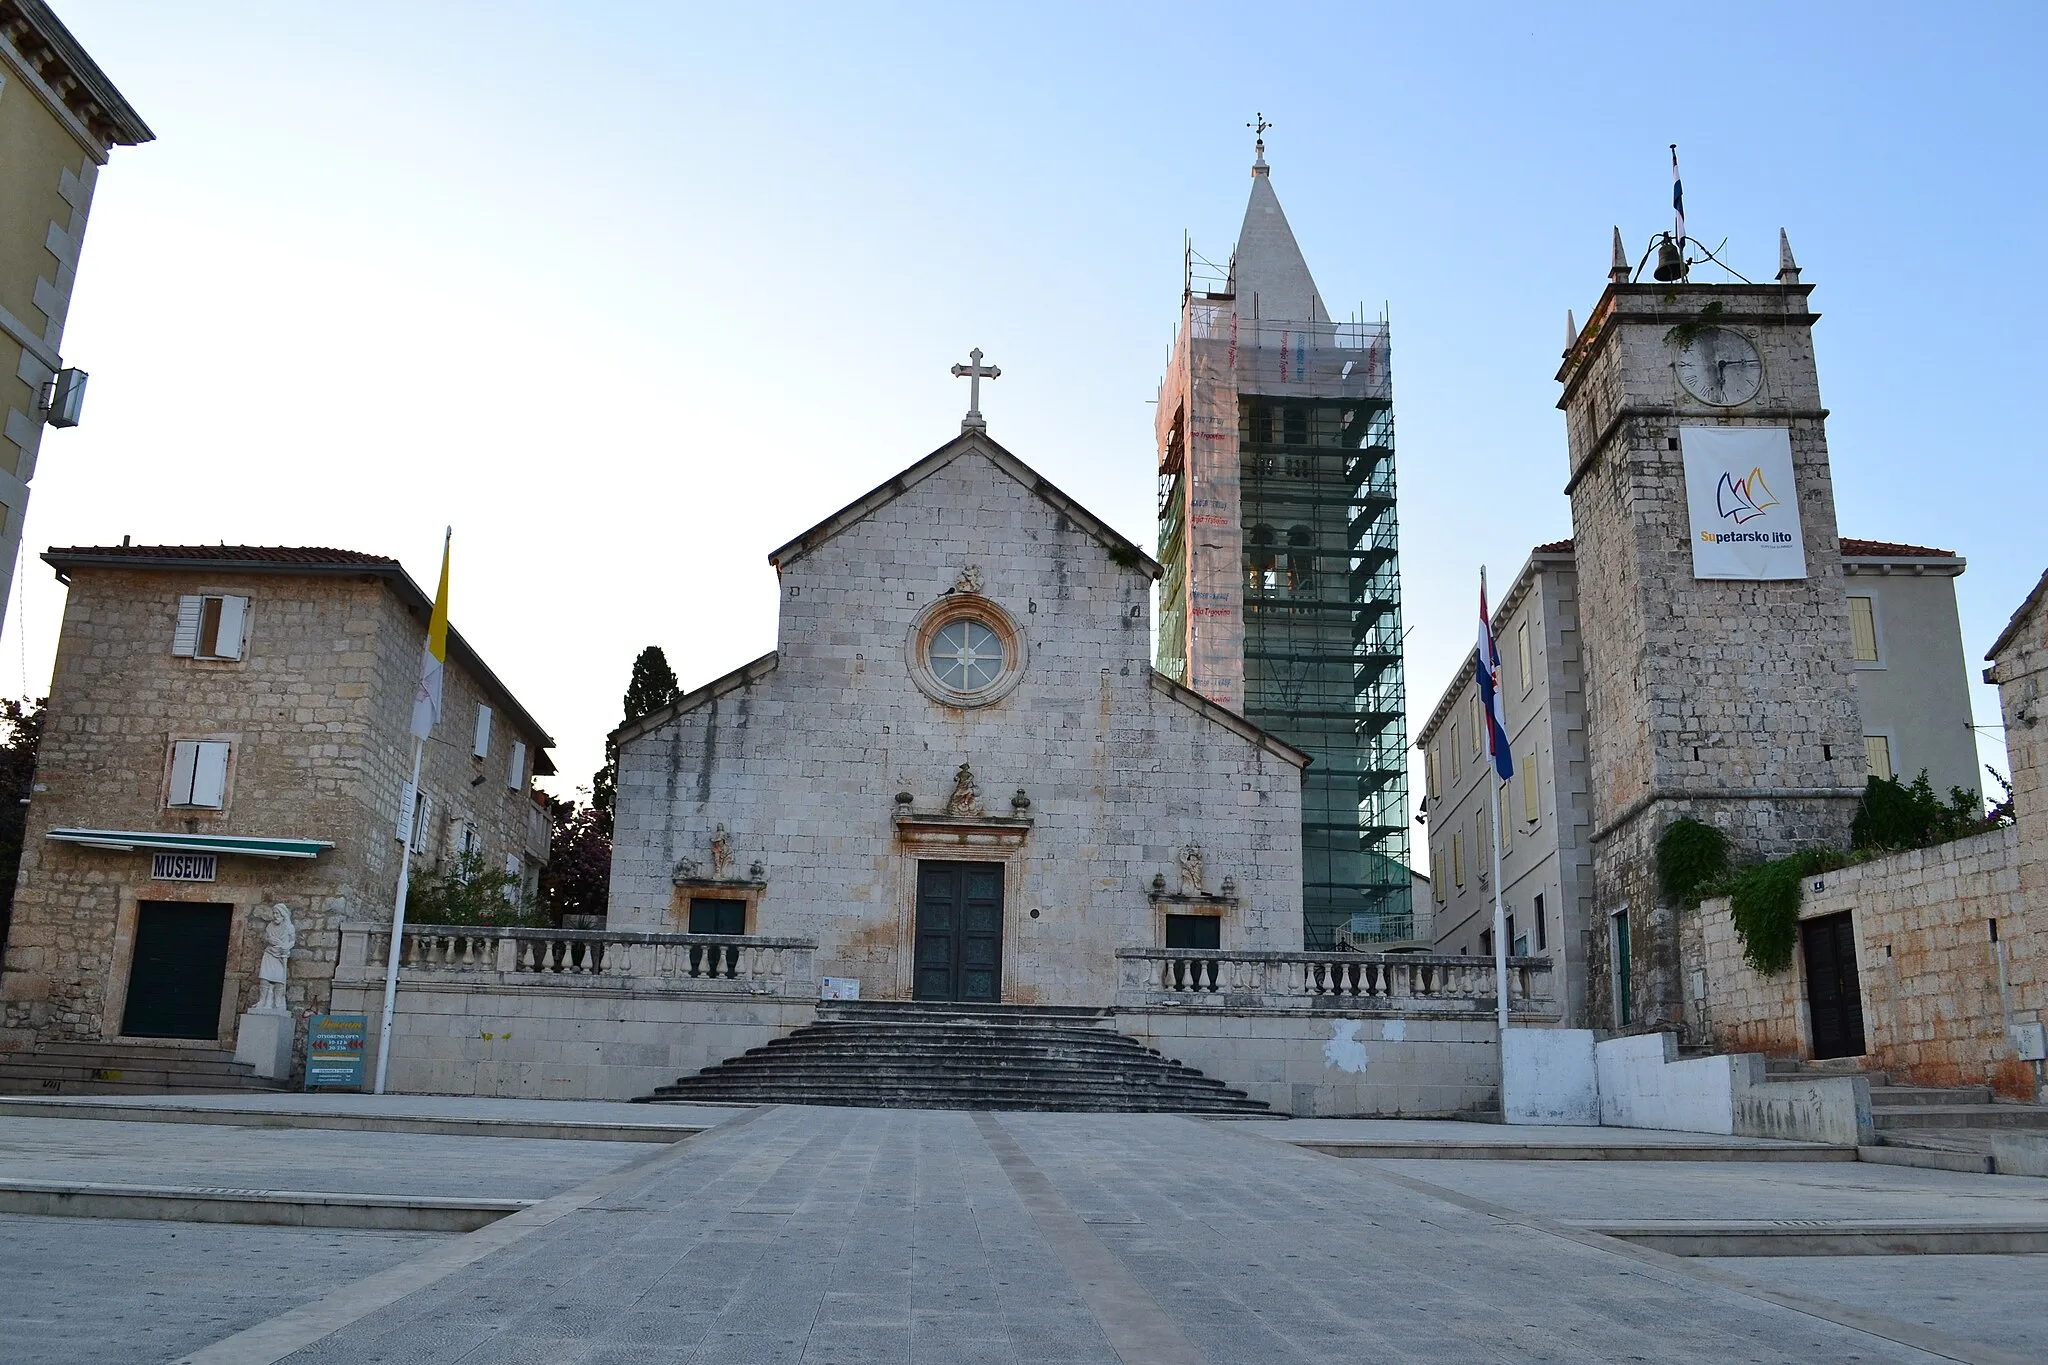 Photo showing: Town Supetar, island Brac, Split-Dalmatia County, Croatia.
Parish church of St. Peter with bell tower. Left - the museum, right - сity tower.